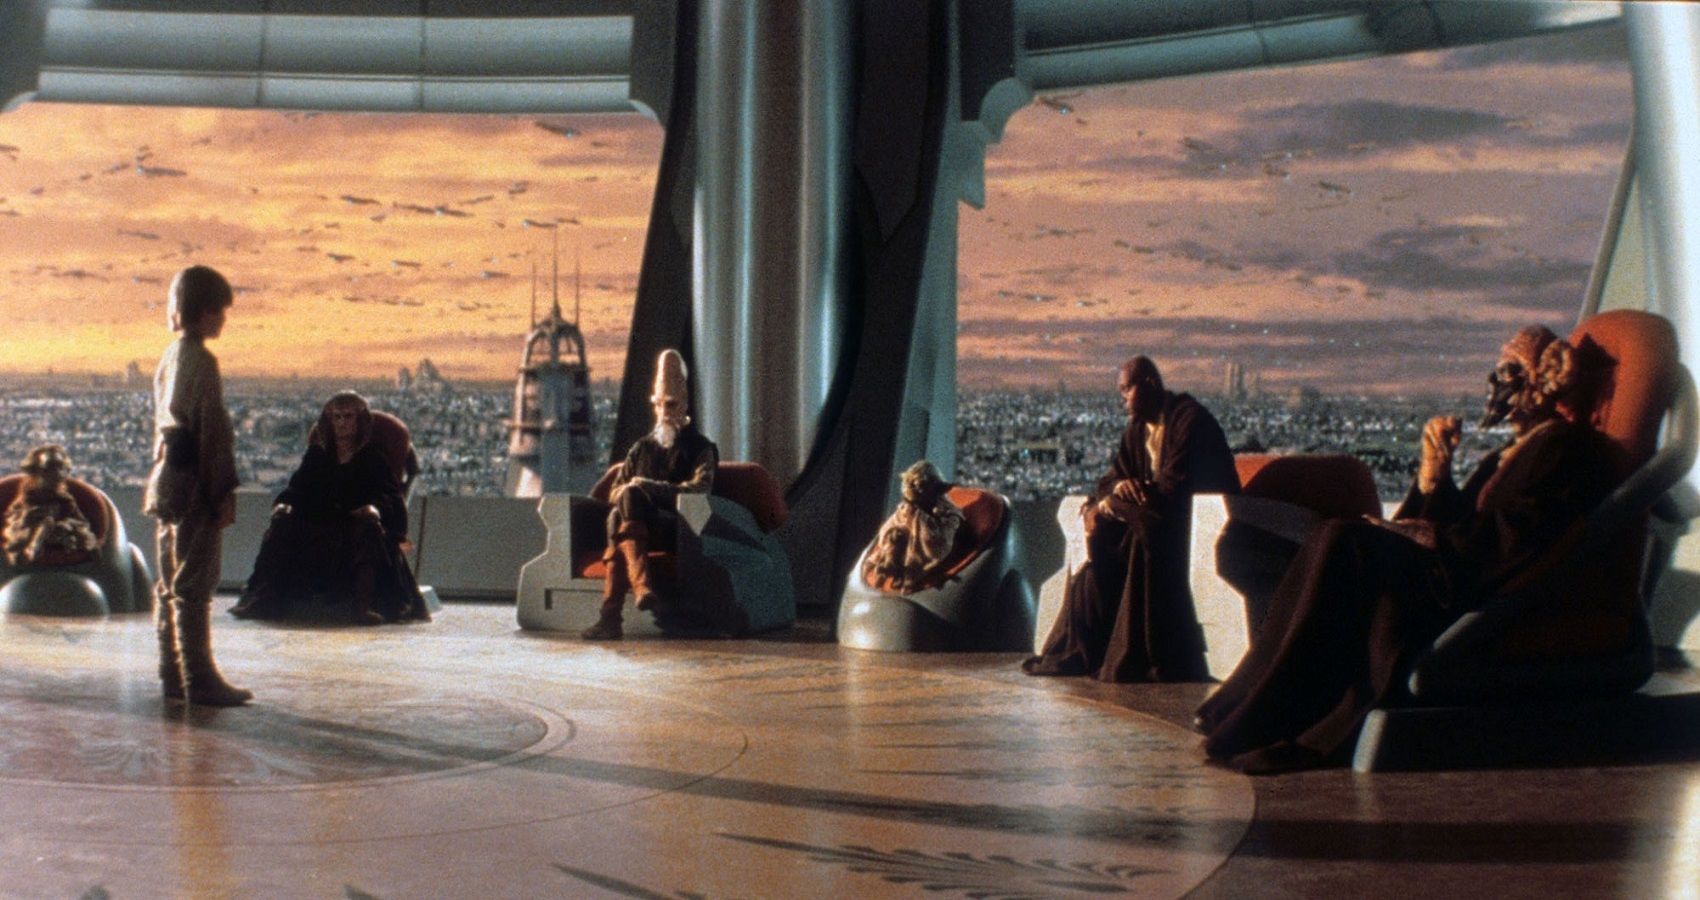 Anakin stands before the Jedi High Council in The Phantom Menace